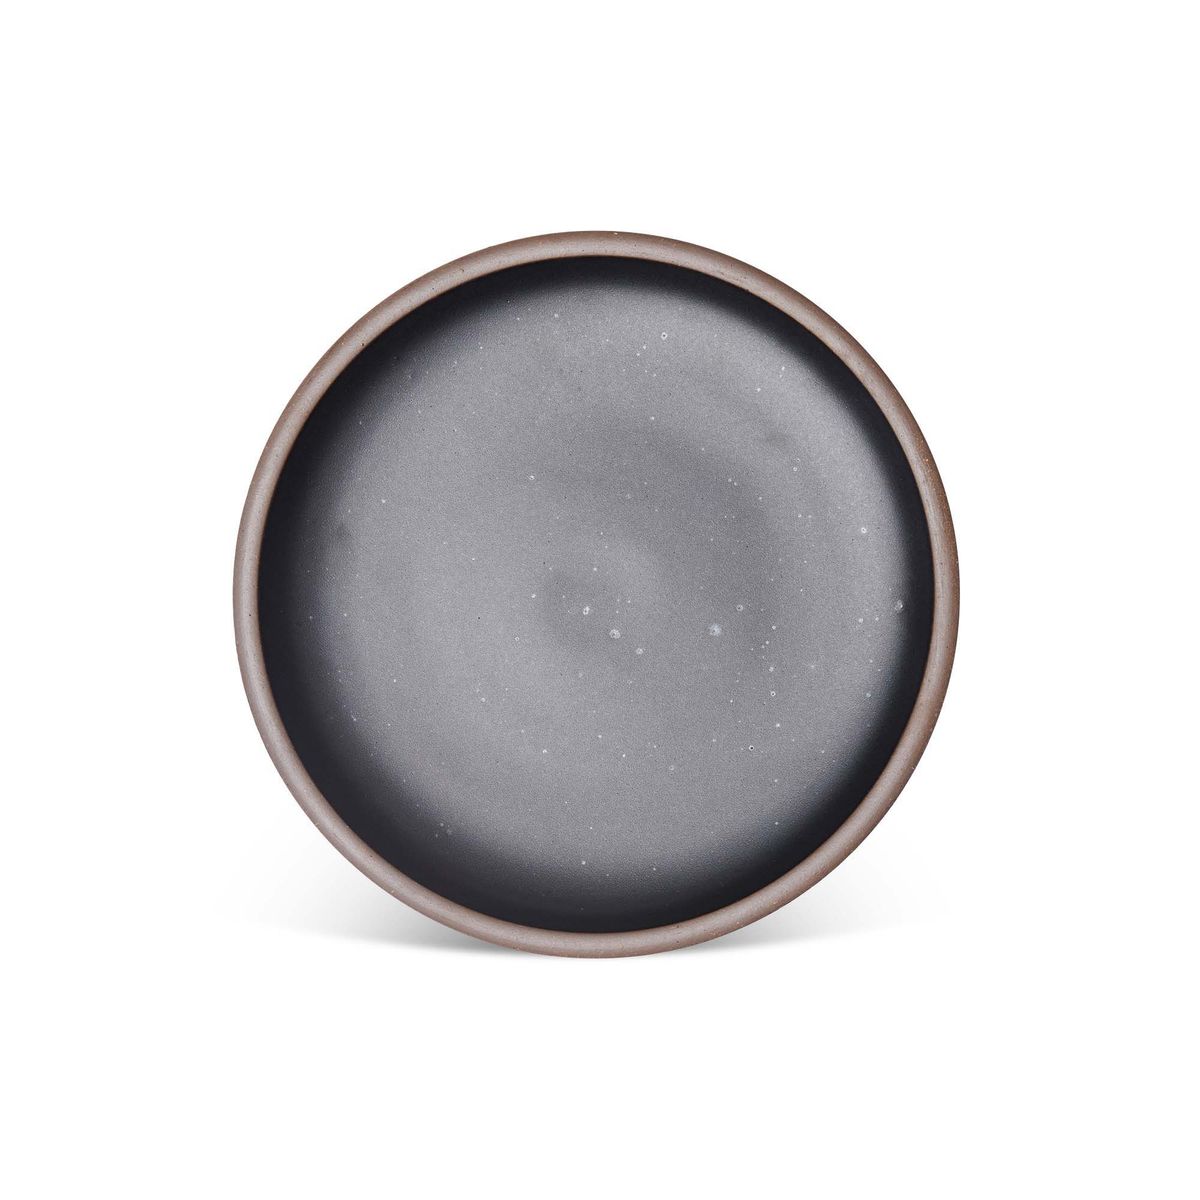 A dinner sized ceramic plate in a graphite black color featuring iron speckles and an unglazed rim